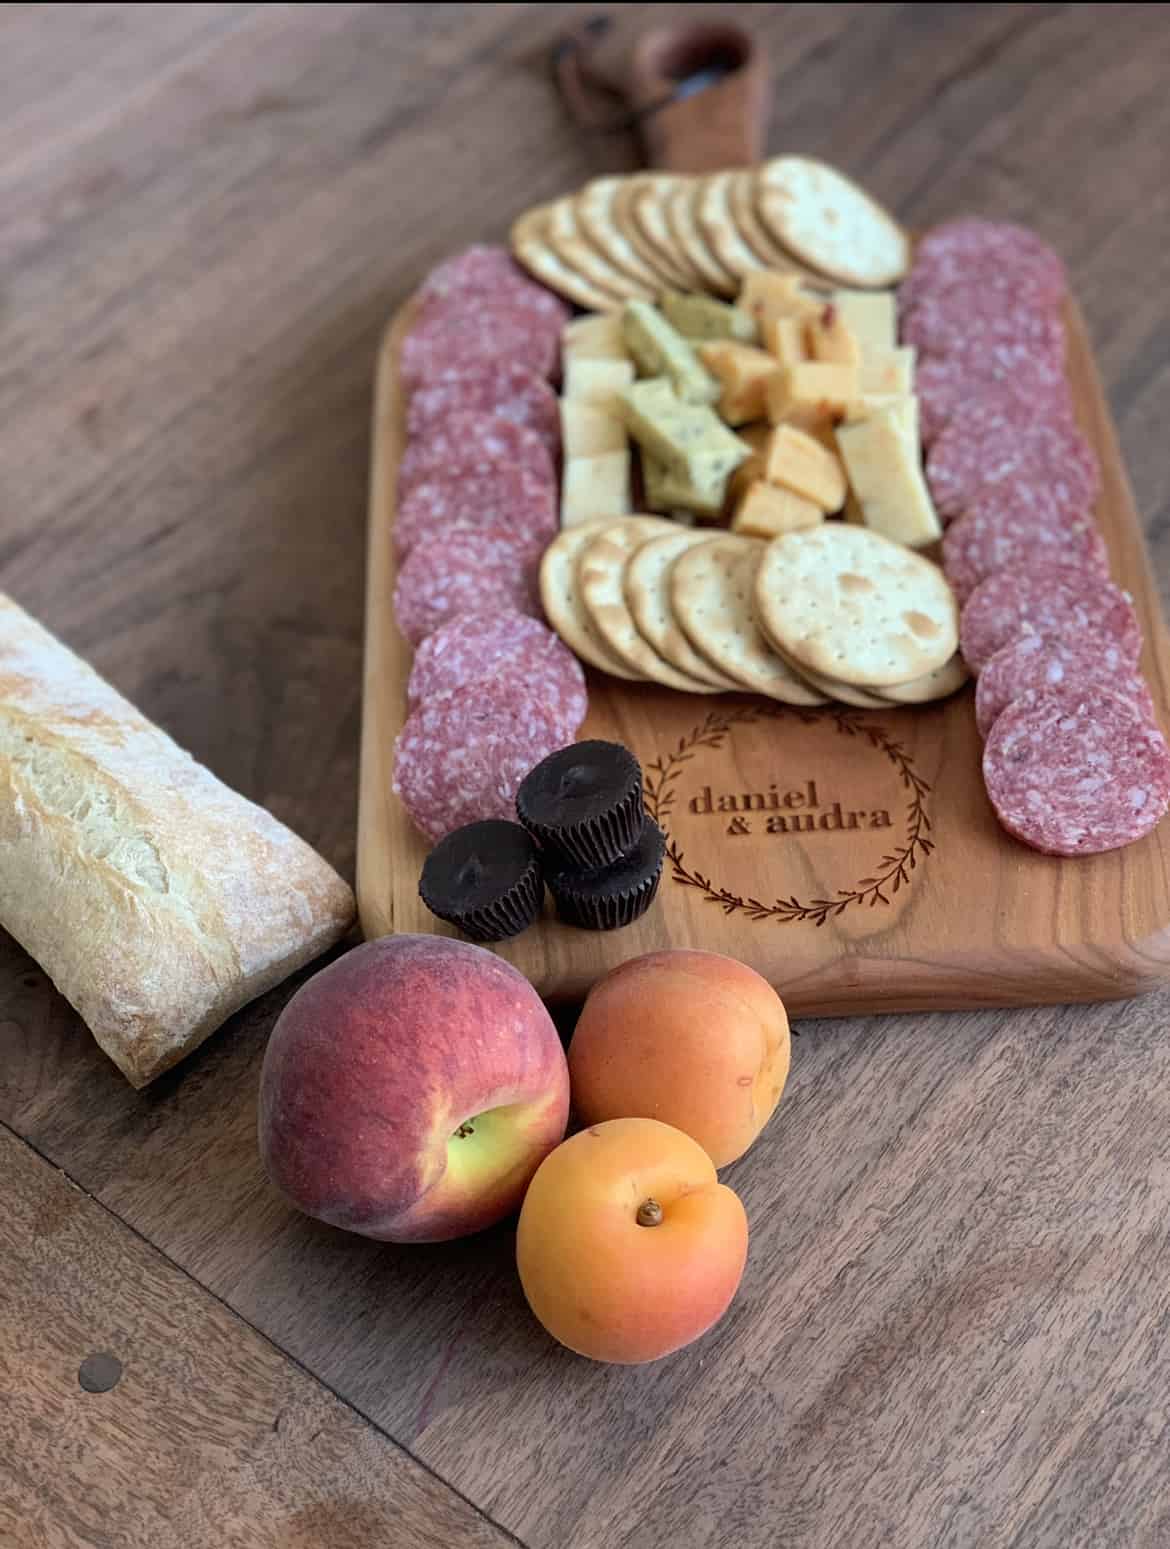 Personalized Cherry wood Charcuterie board With handle - Clines Crafted Woodworking LLC